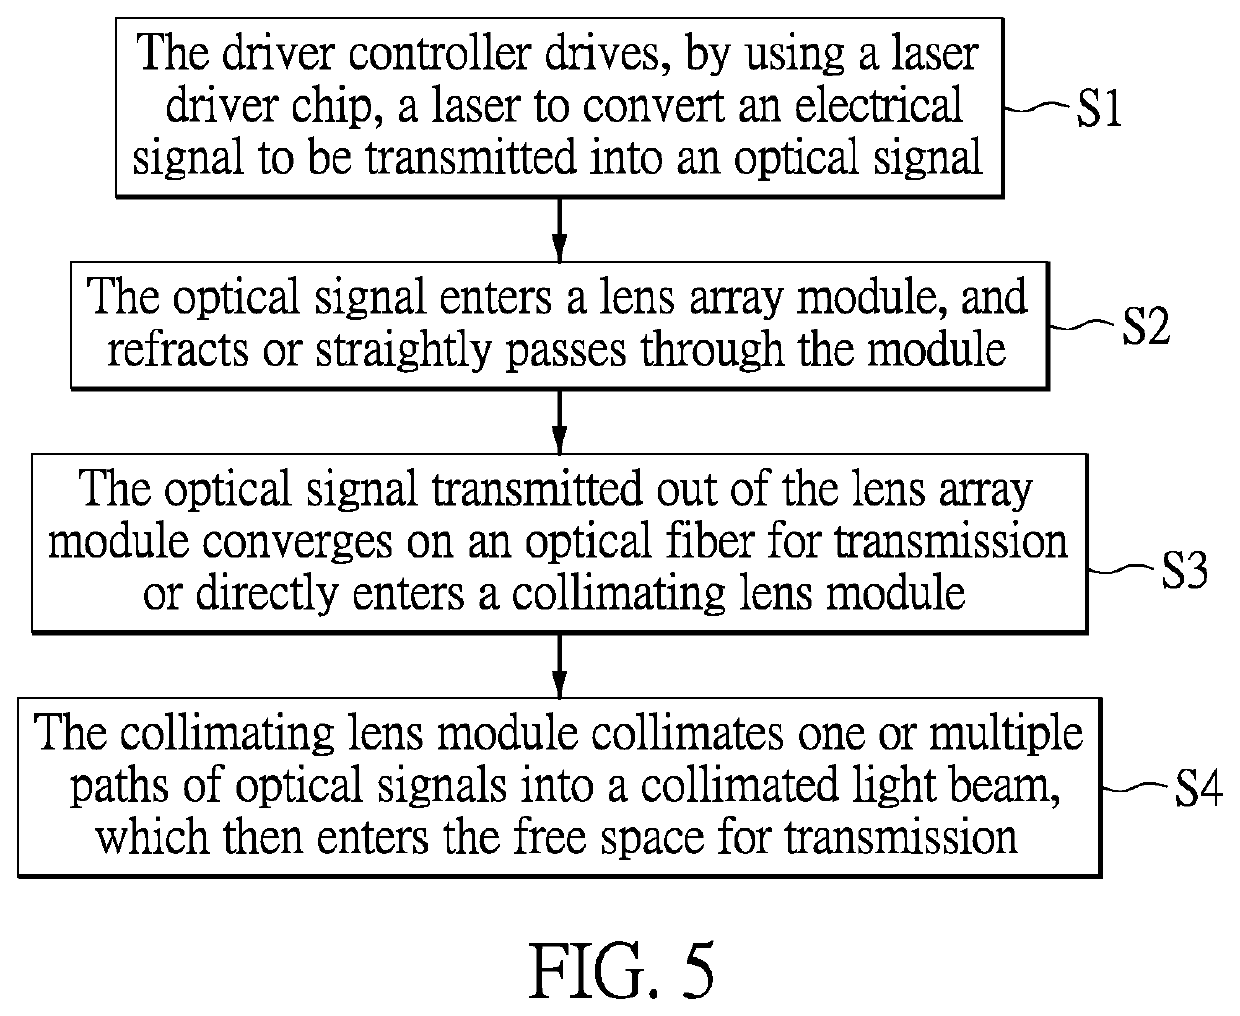 Free-space optical signal alignment and transmission device, system and method